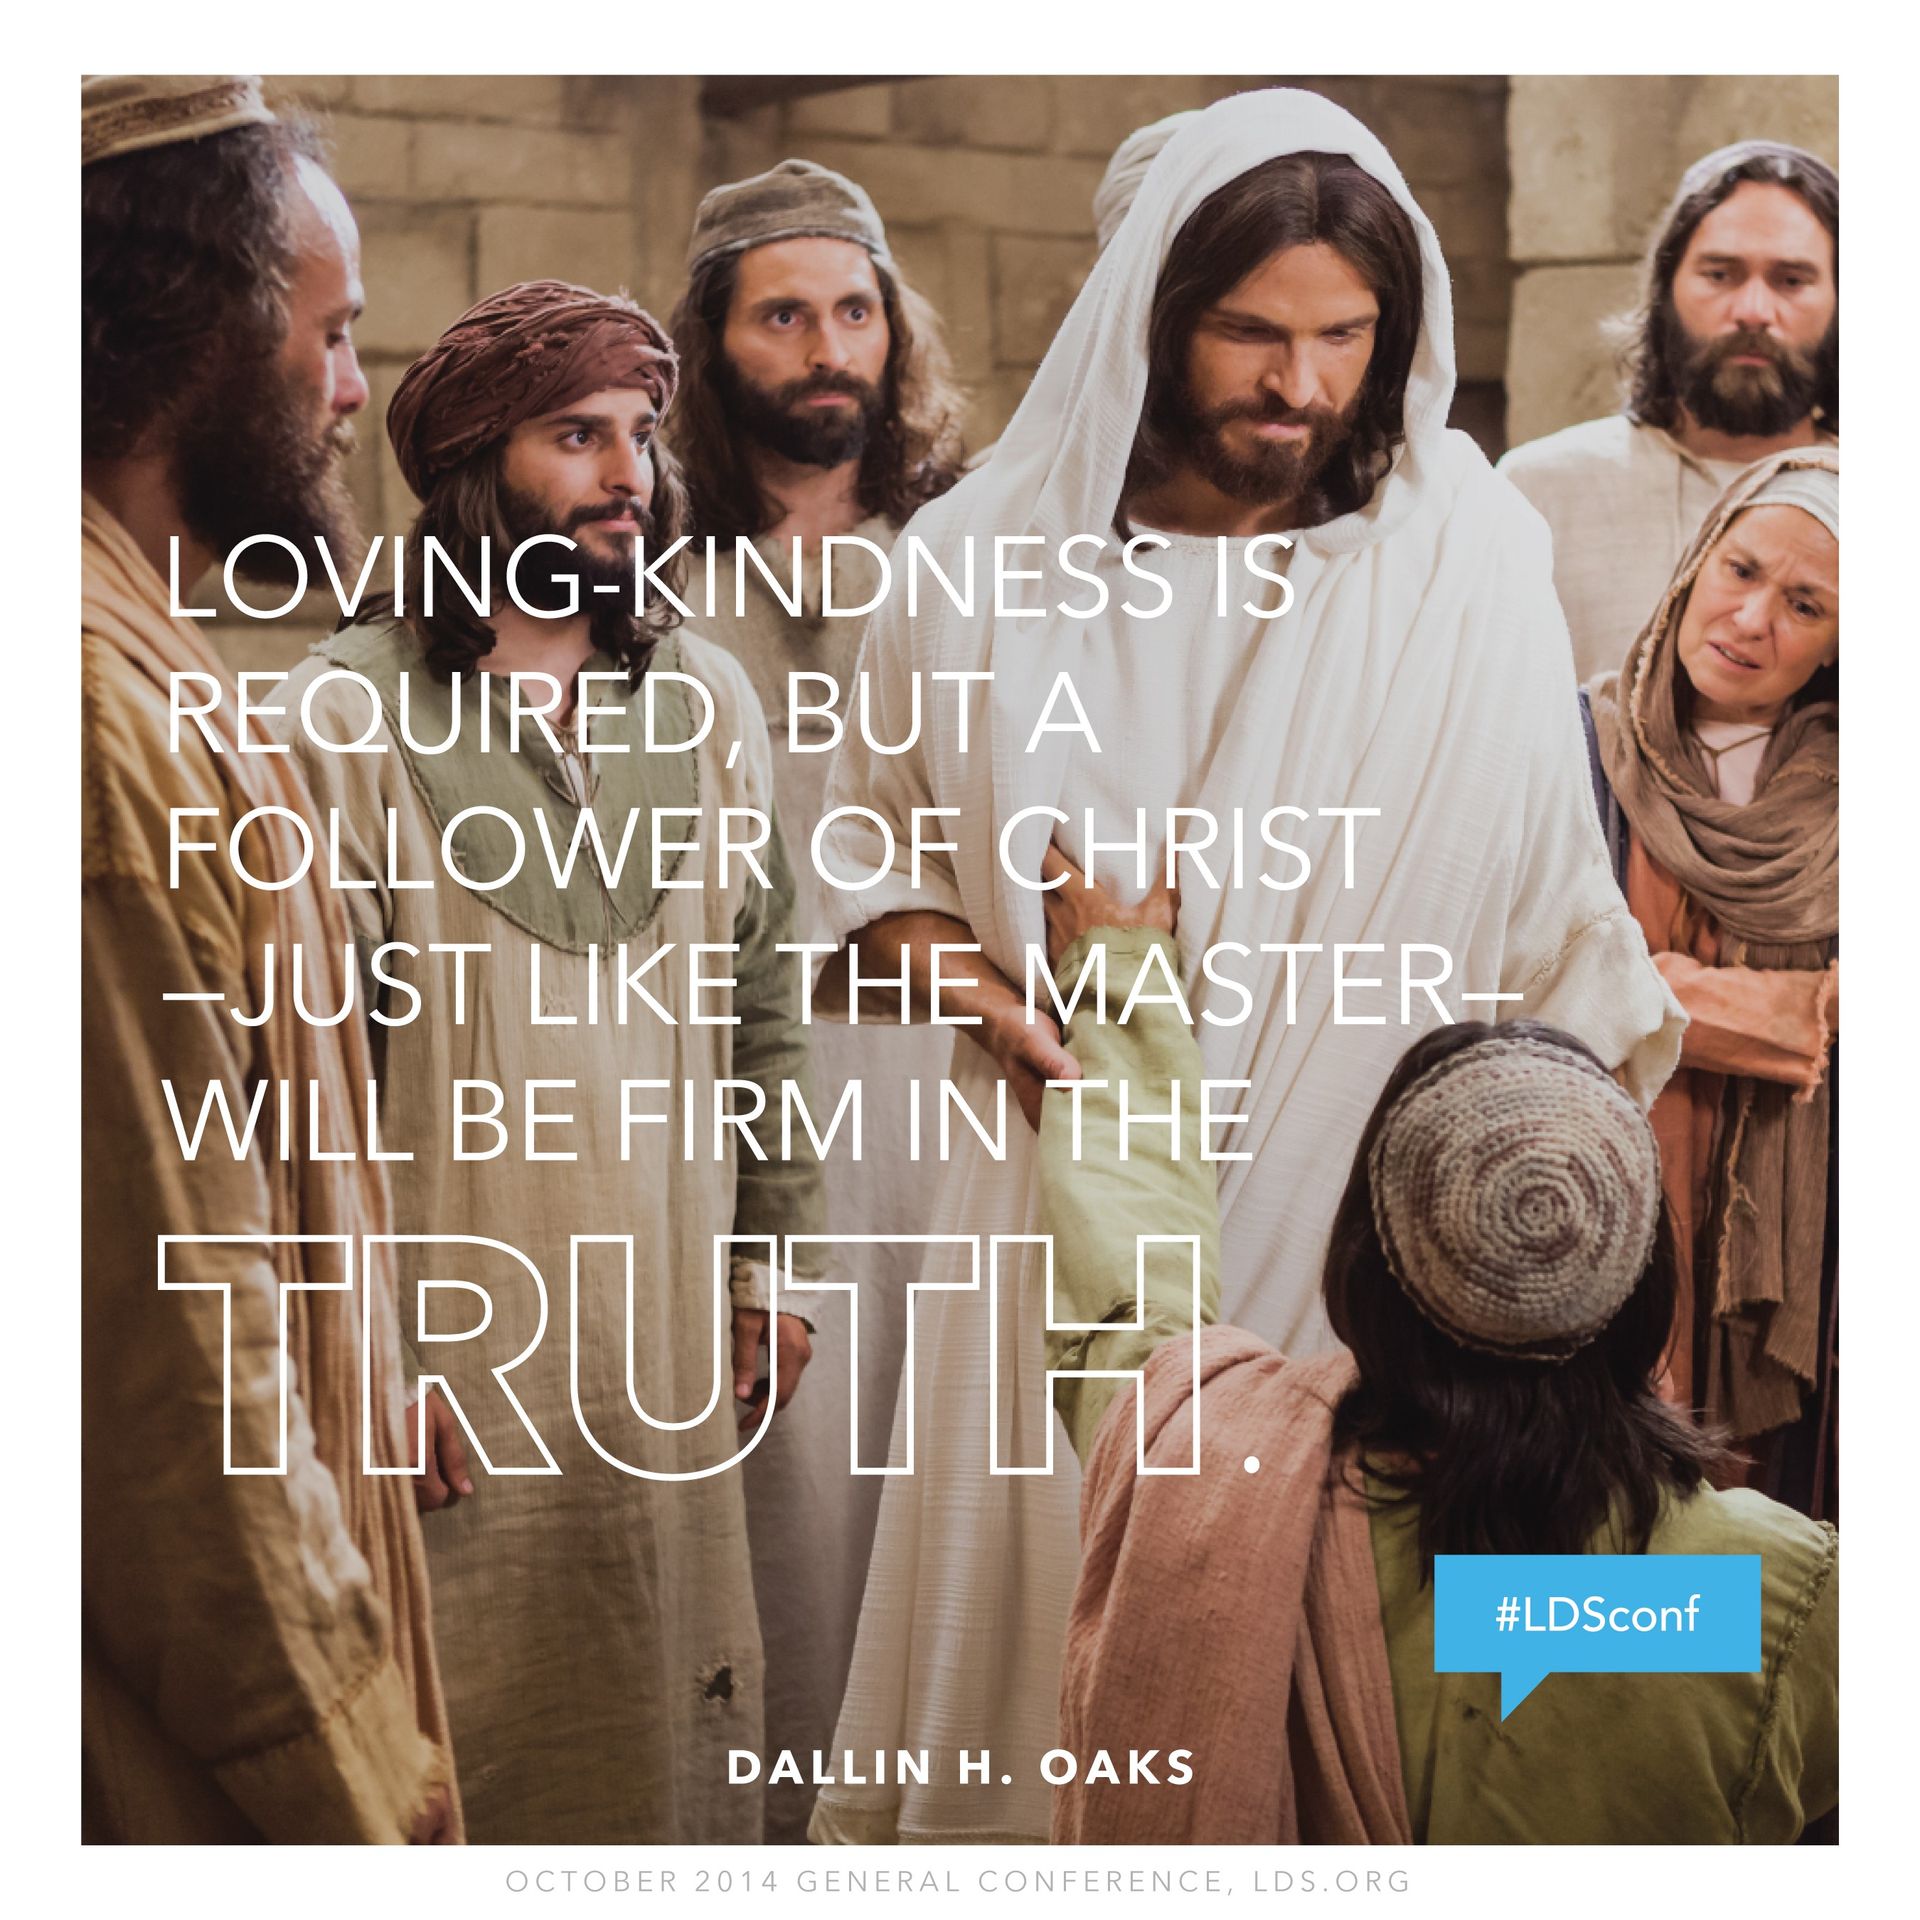 “Loving-kindness is required, but a follower of Christ—just like the Master—will be firm in the truth.”—Elder Dallin H. Oaks, “Loving Others and Living with Differences” © undefined ipCode 1.